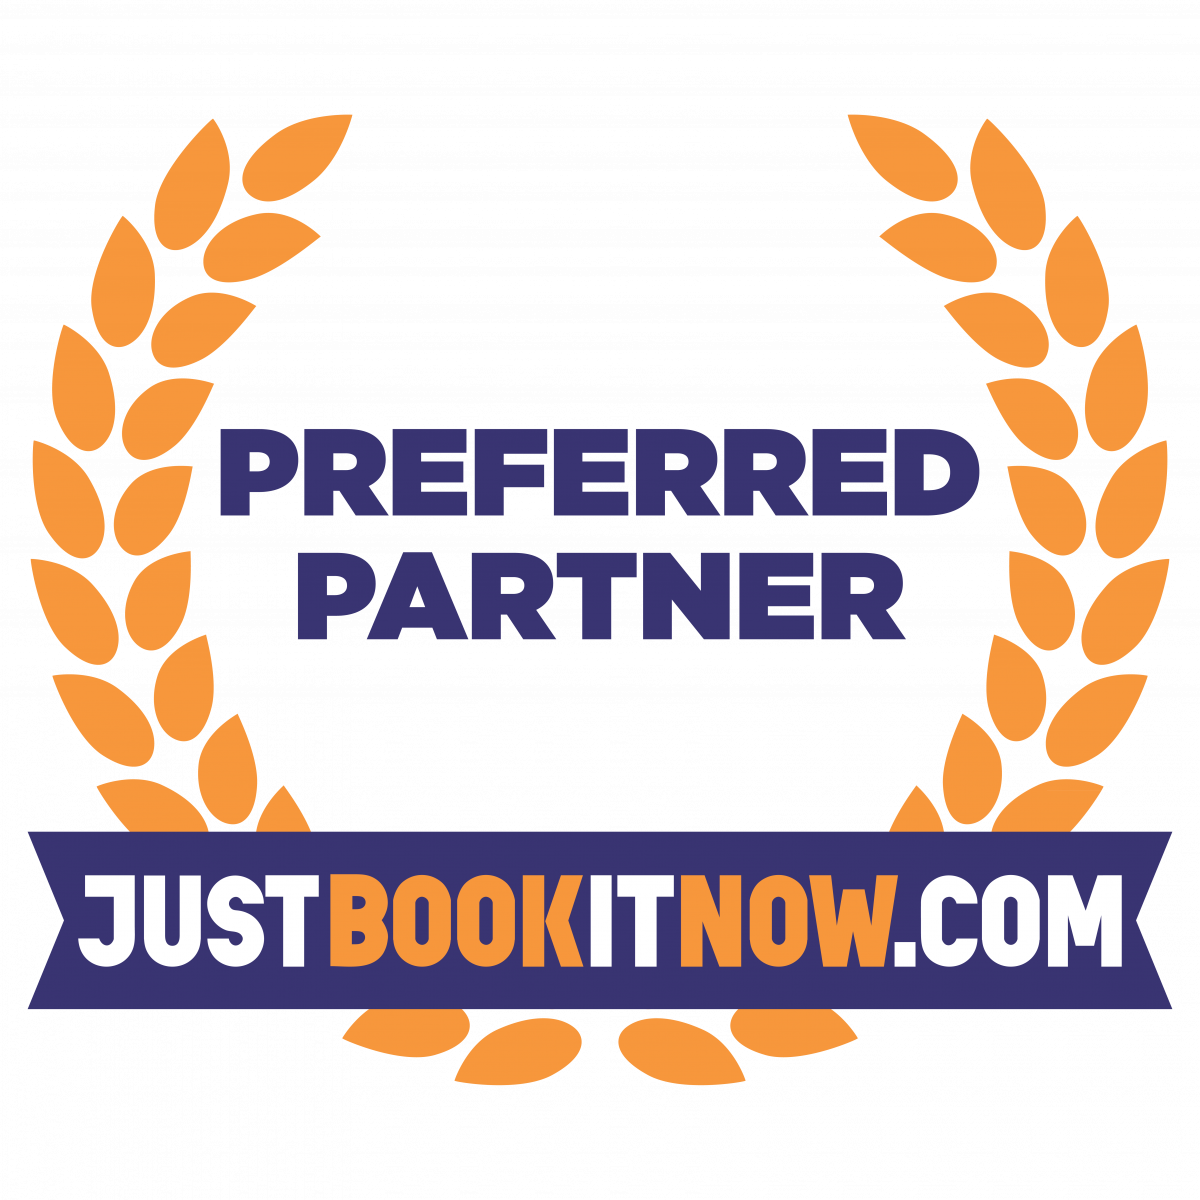 Partner with Flame and Justbookitnow.com